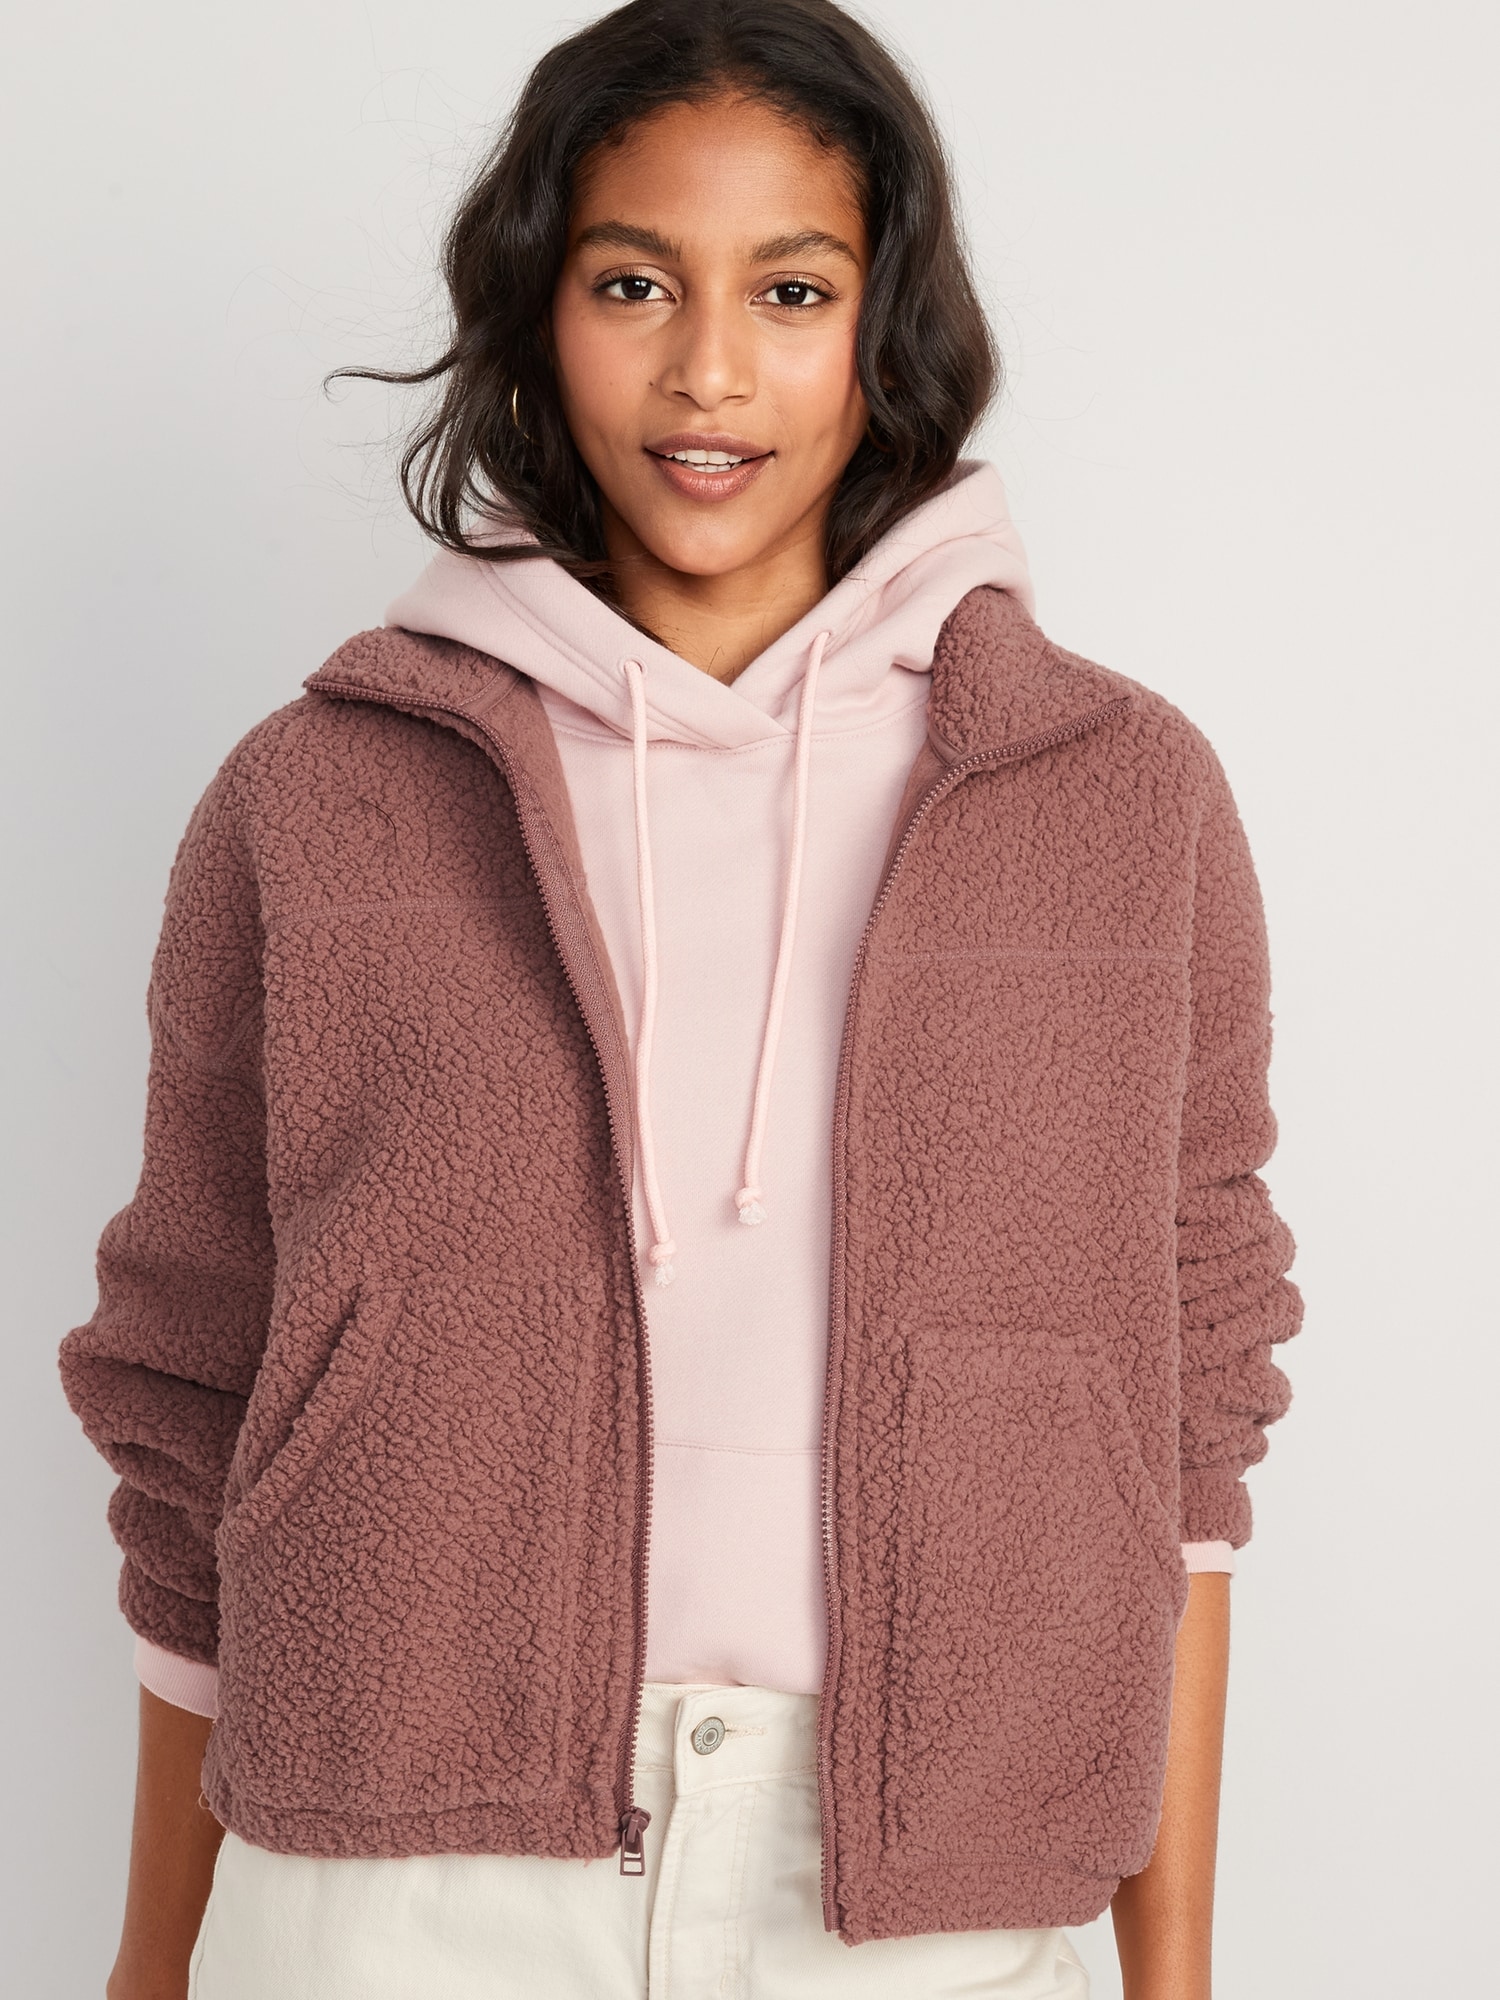 Slouchy Sherpa Zip Jacket for Women | Old Navy